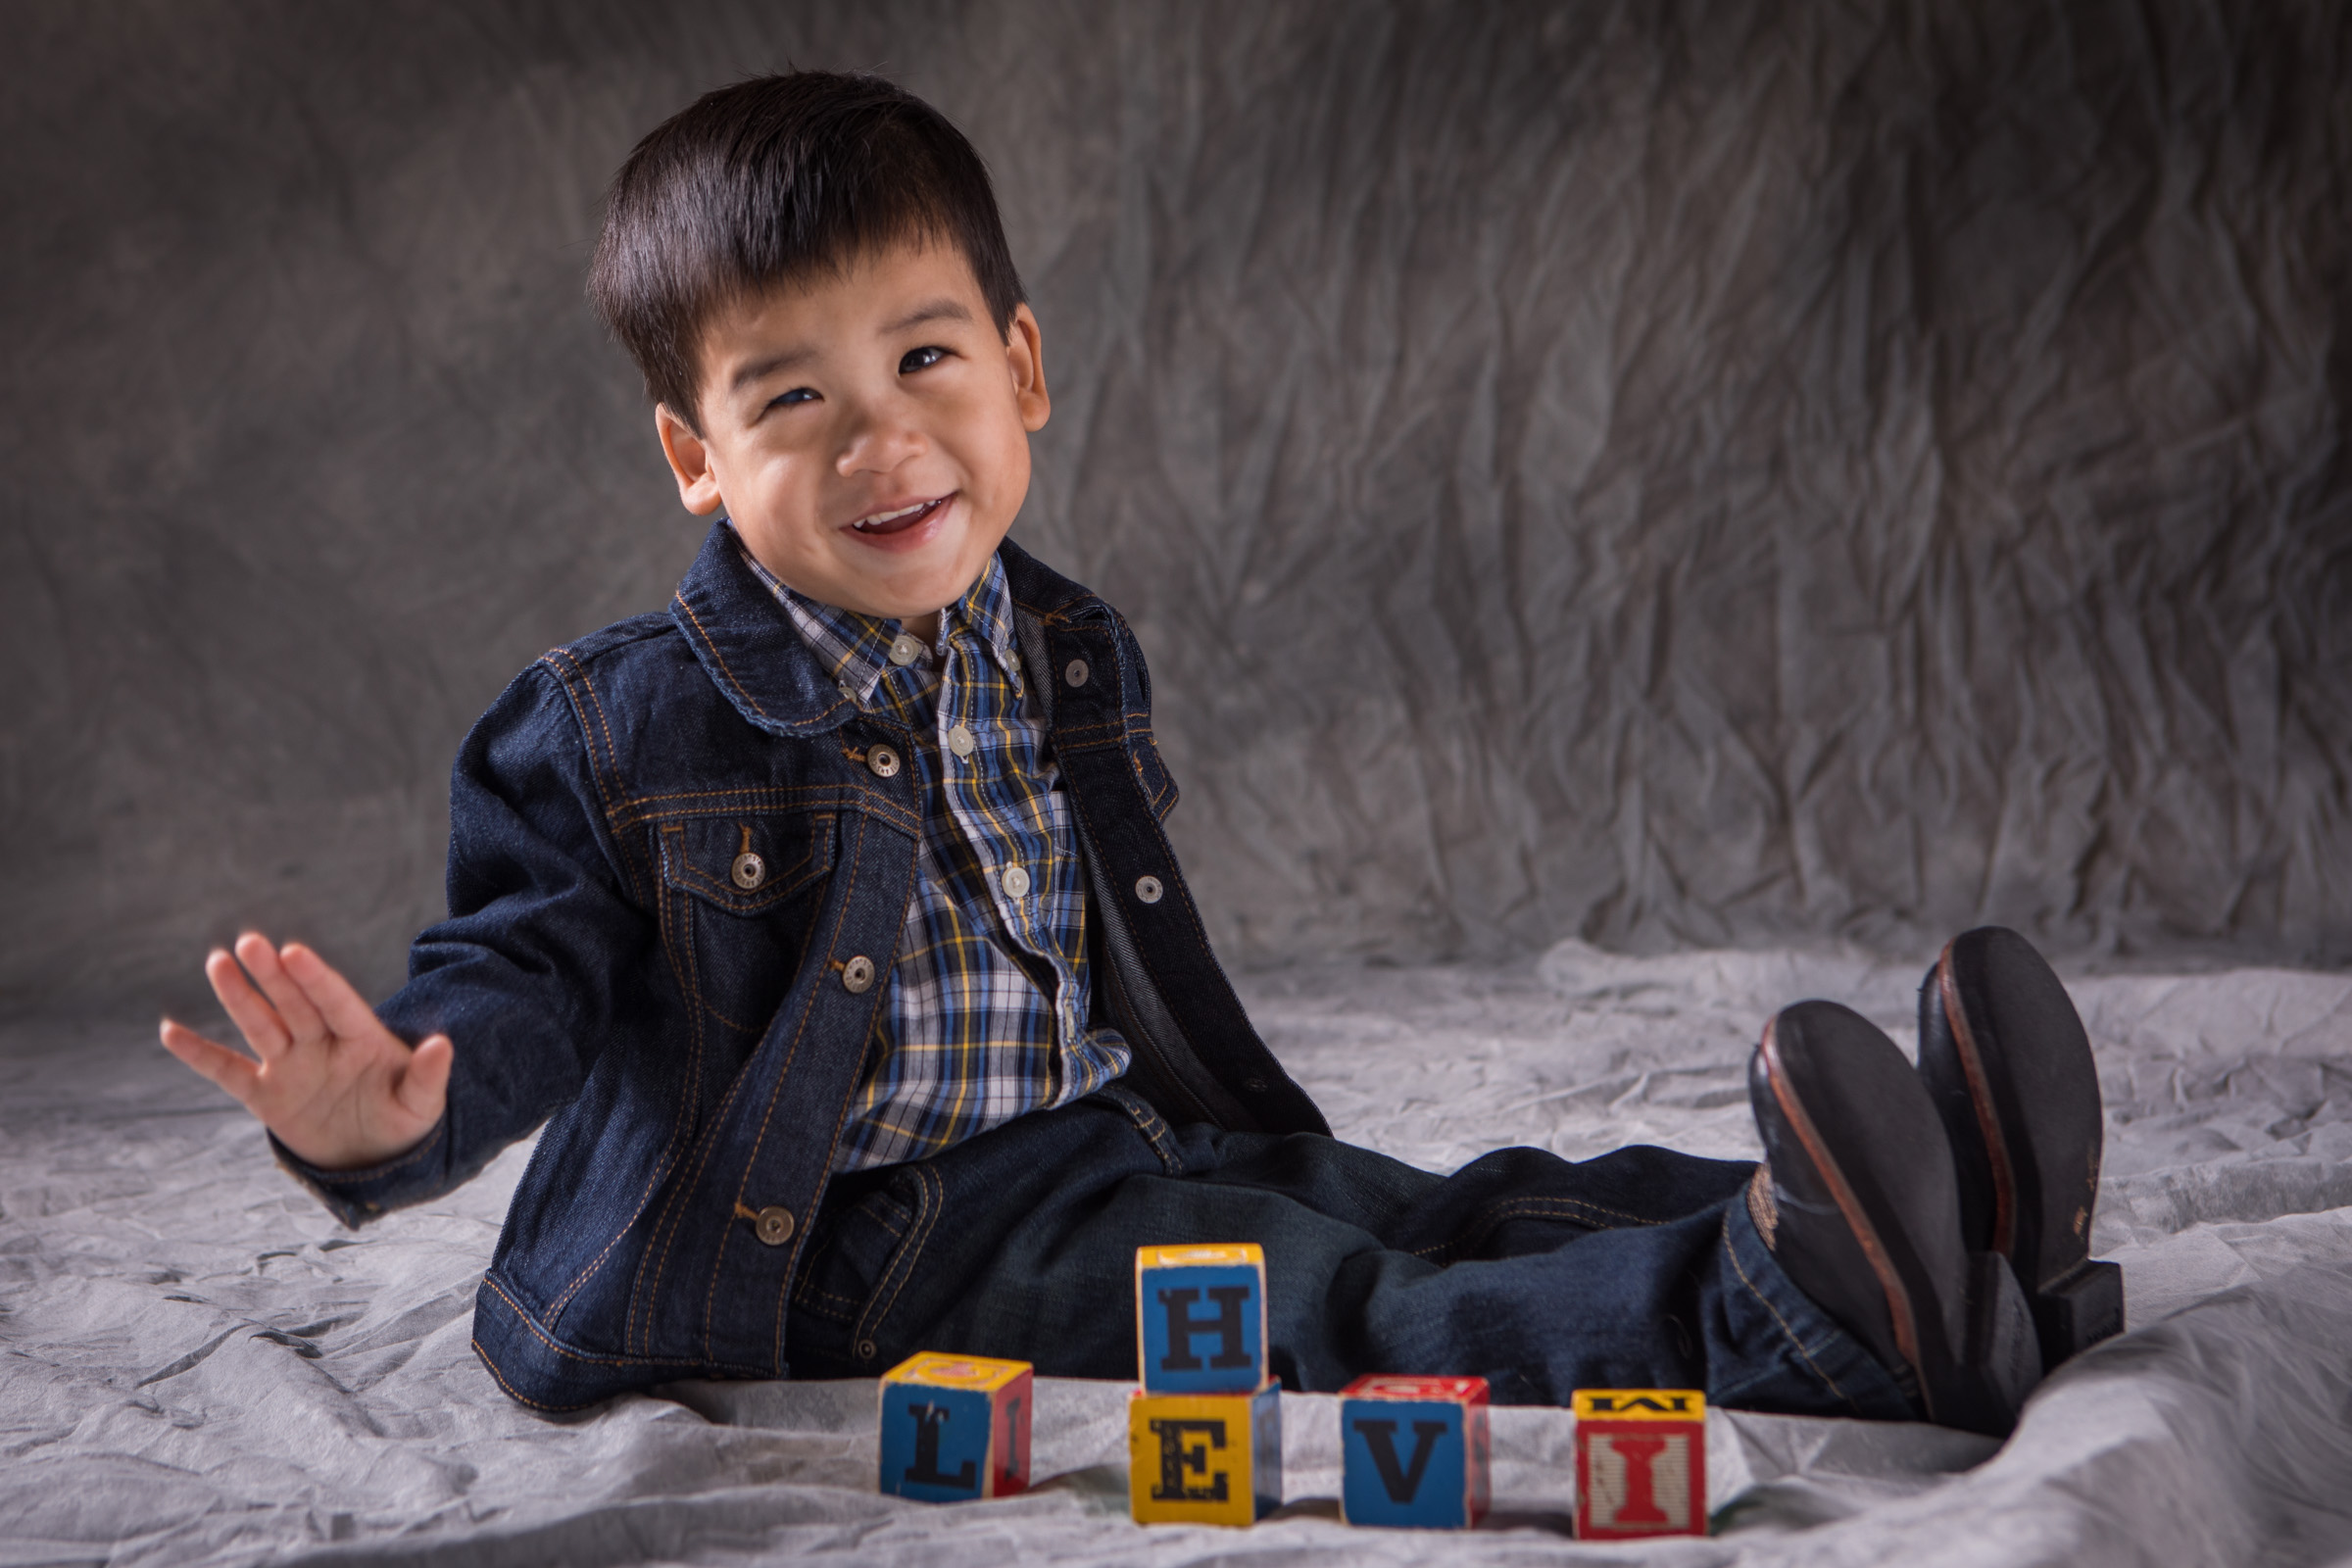 Thanks to Holt International's SNAF grants, Levi joined a loving, permanent family through adoption.